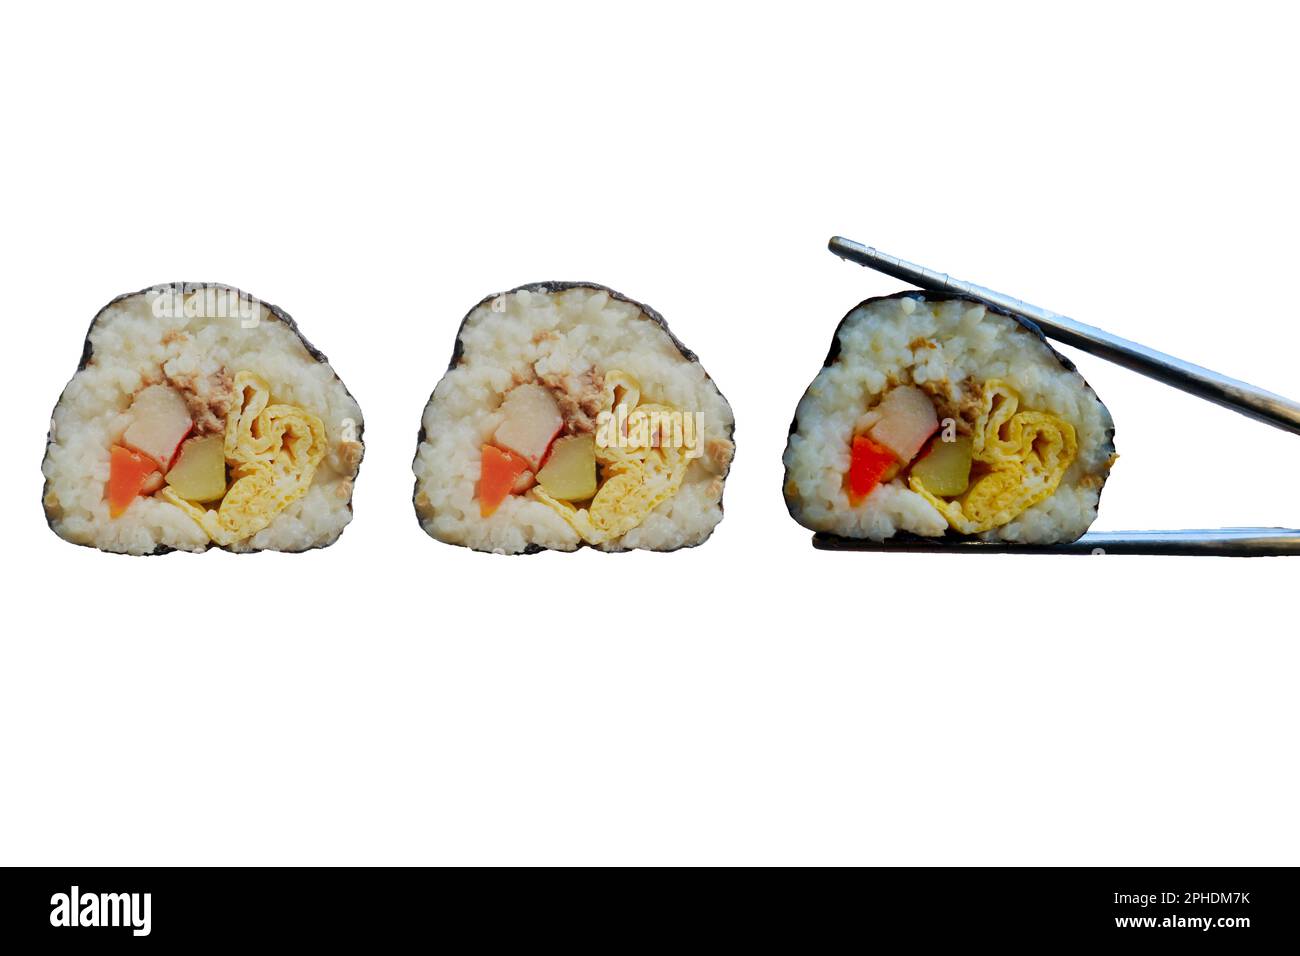 https://c8.alamy.com/comp/2PHDM7K/kimbap-or-gimbap-is-korean-roll-gimbapkimbob-made-from-steamed-white-rice-bap-and-various-other-ingredients-kimbab-and-chopstick-2PHDM7K.jpg